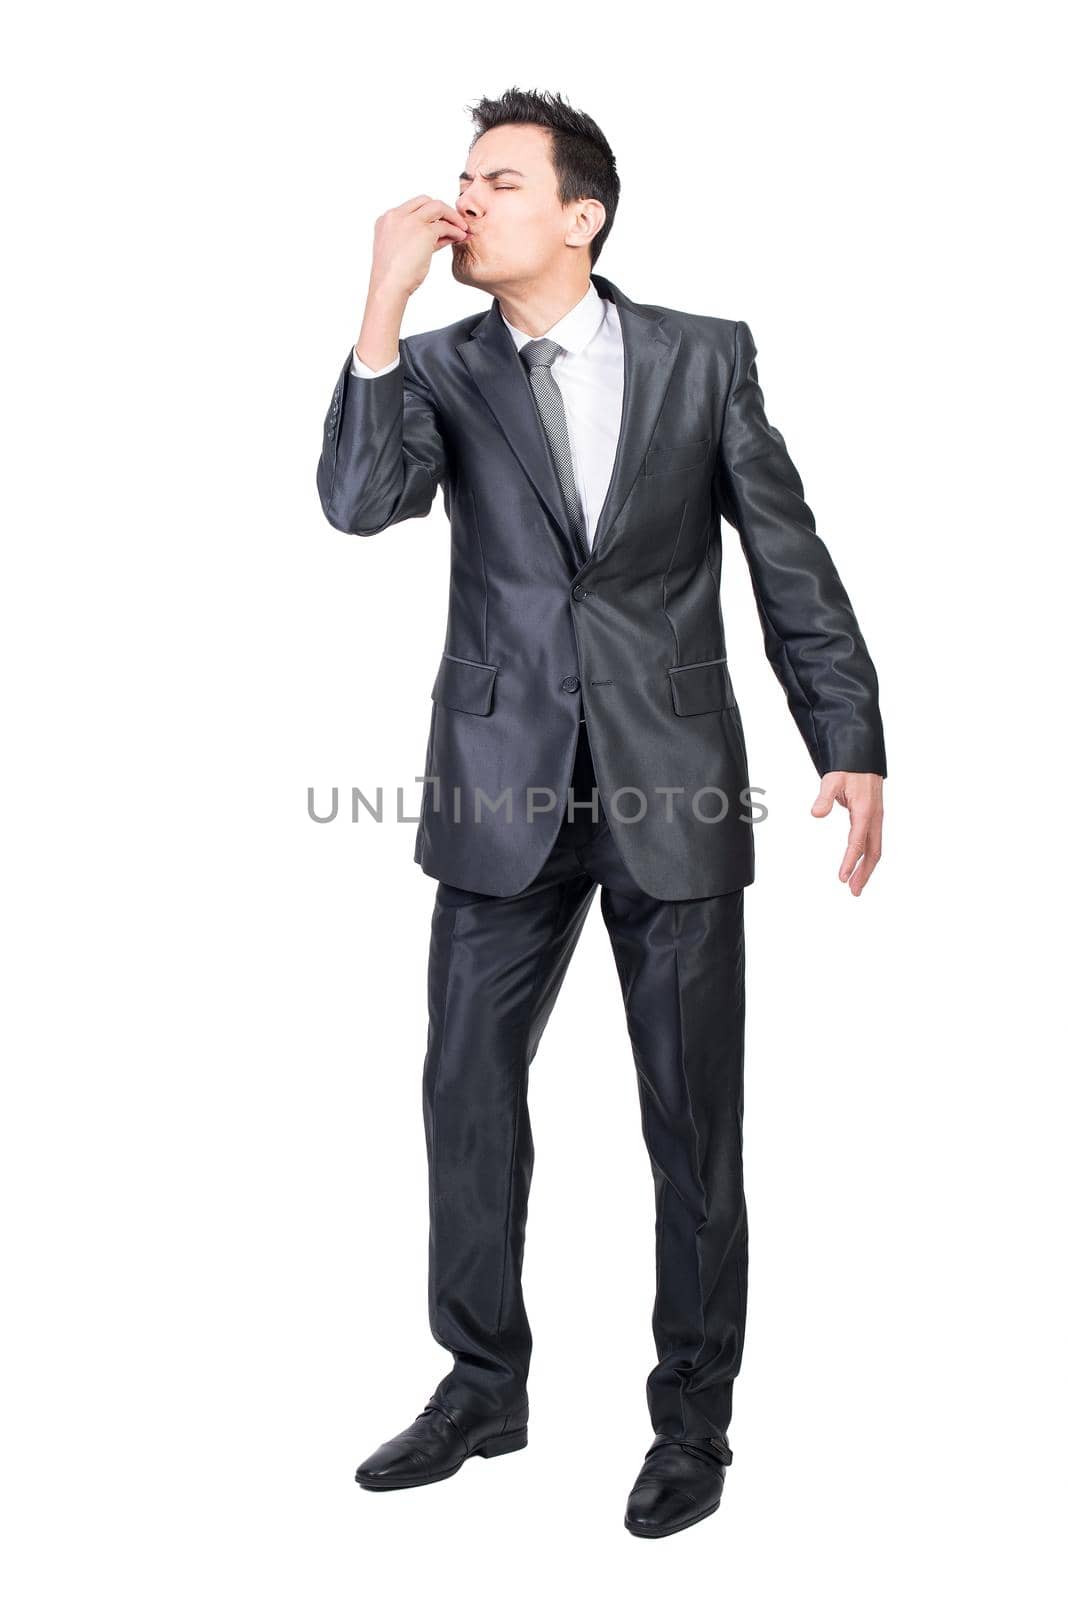 Full body of businessman with closed eyes kissing fingers while making delicious gesture in studio against white background